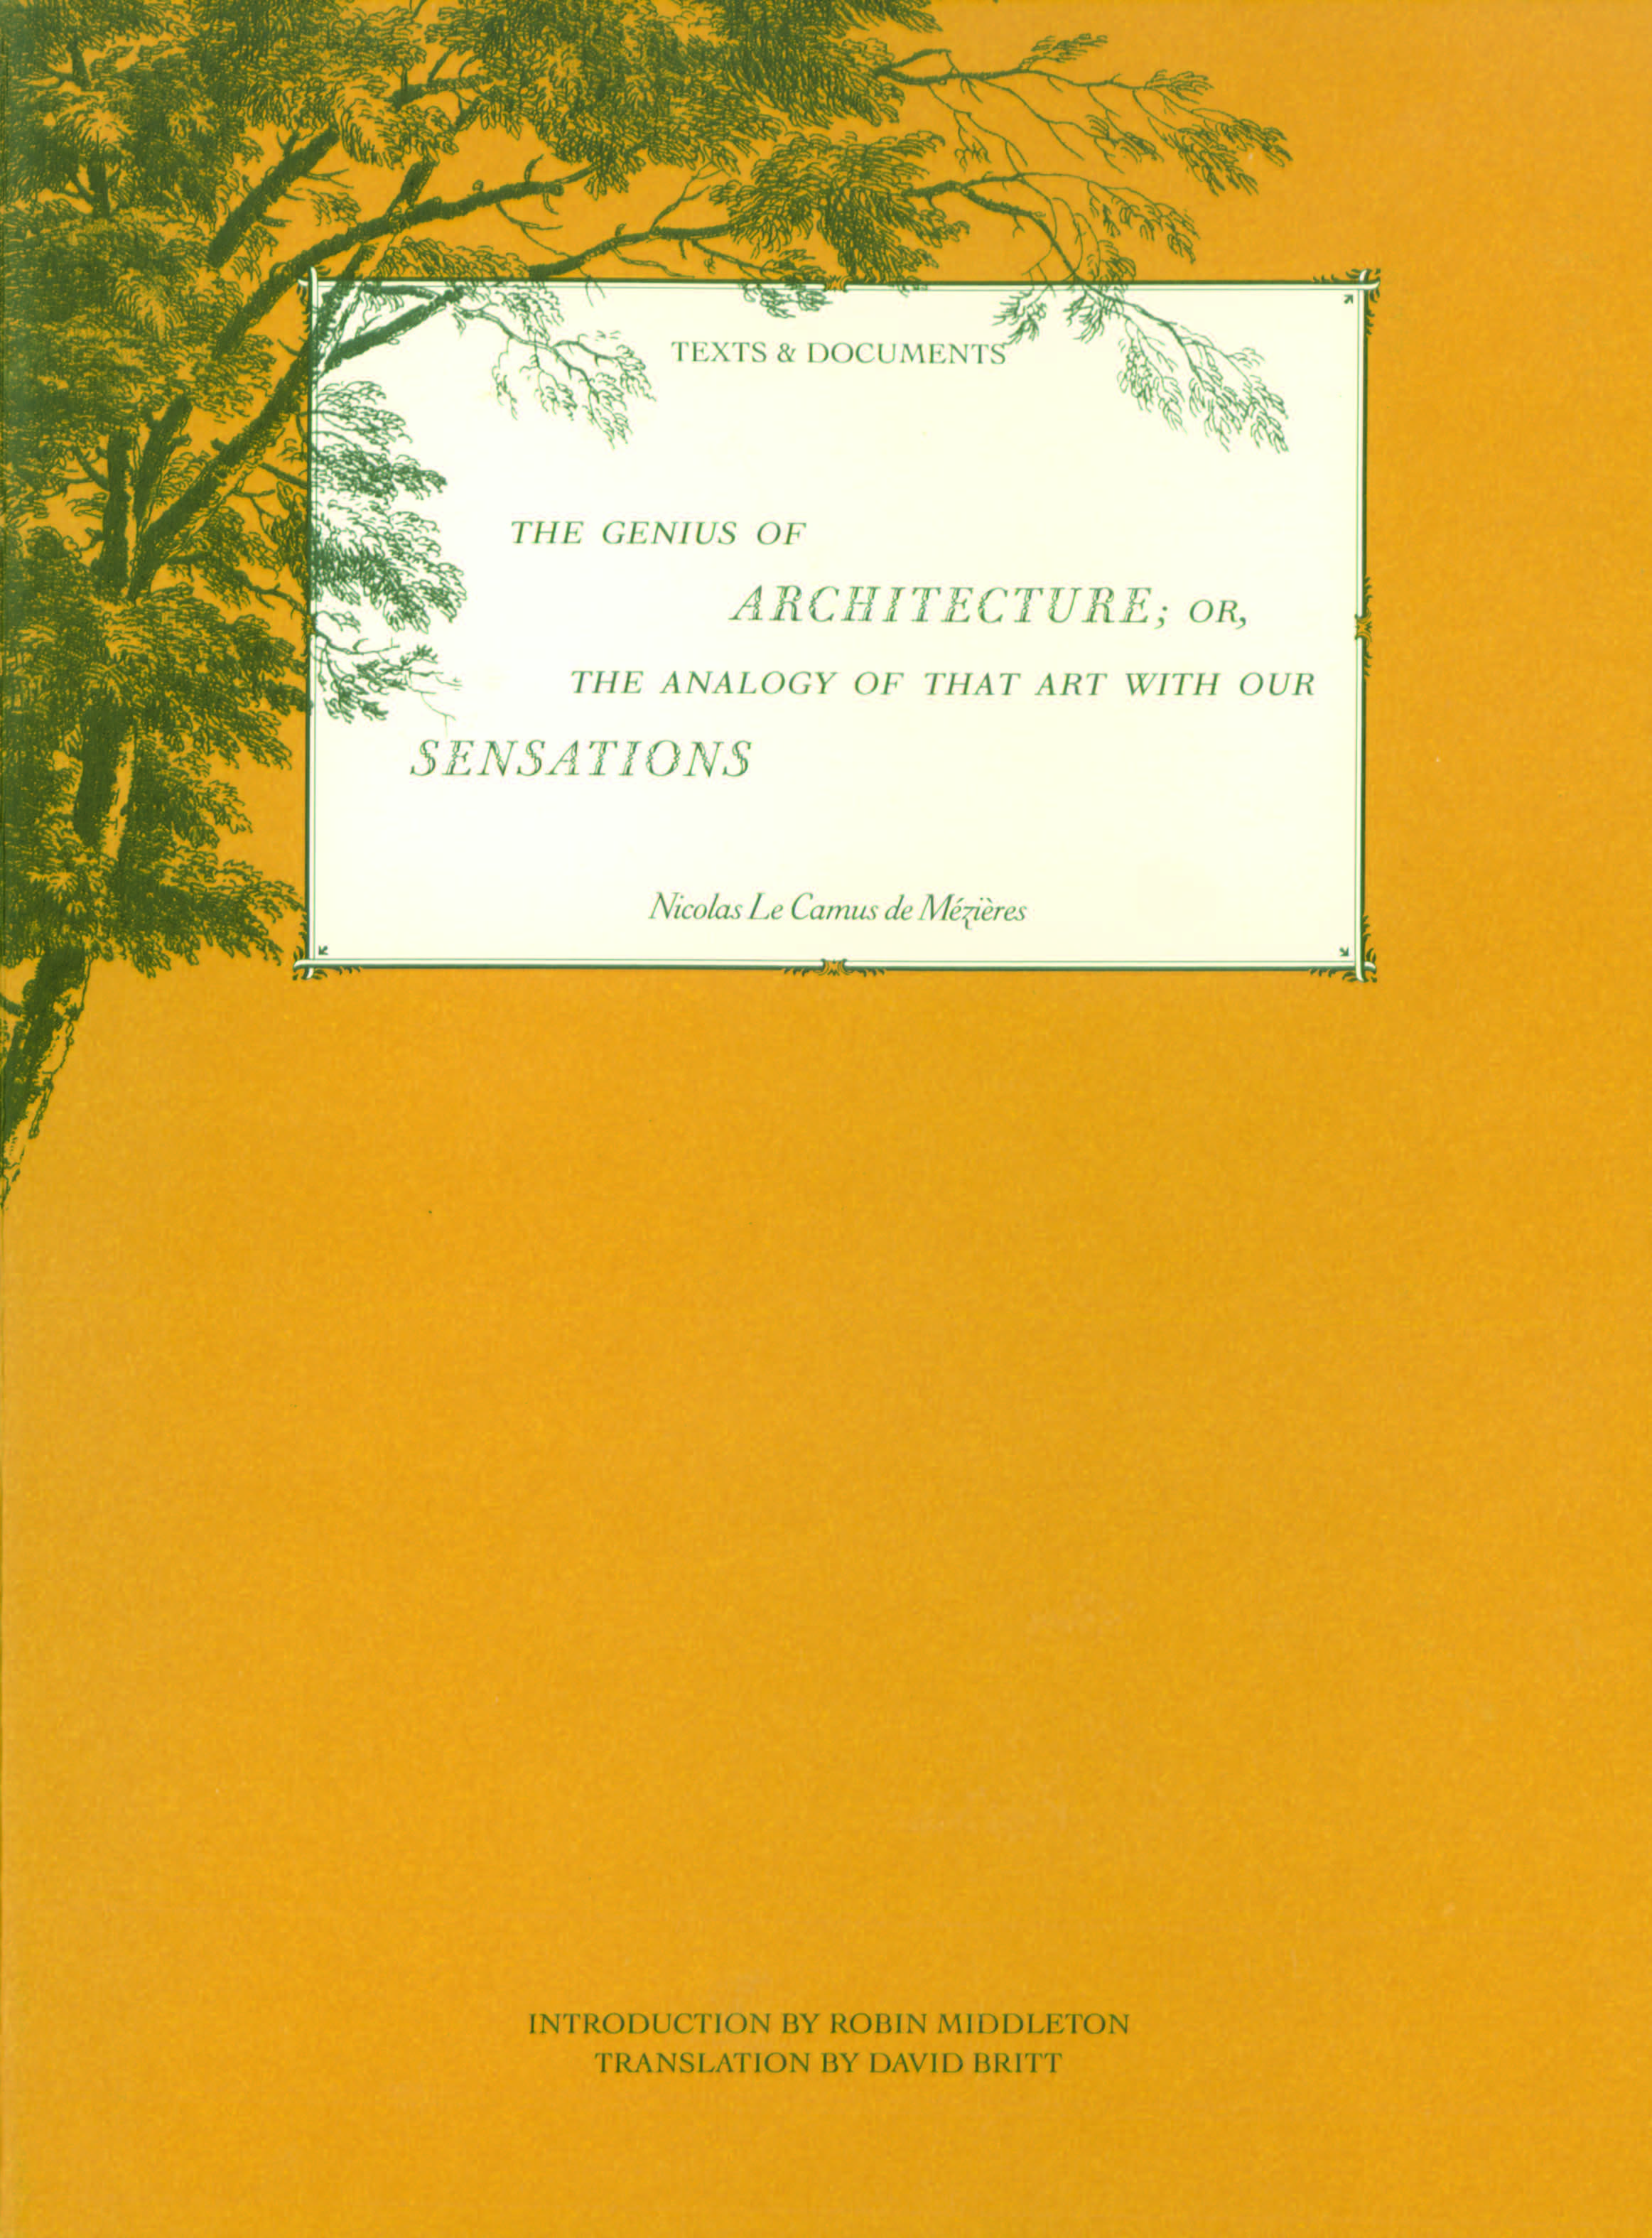 The Genius of Architecture; or, The Analogy of That Art with Our Sensations  Nicolas Le Camus de Mézières  Introduction by Robin Middleton; Translation by David Britt  1992